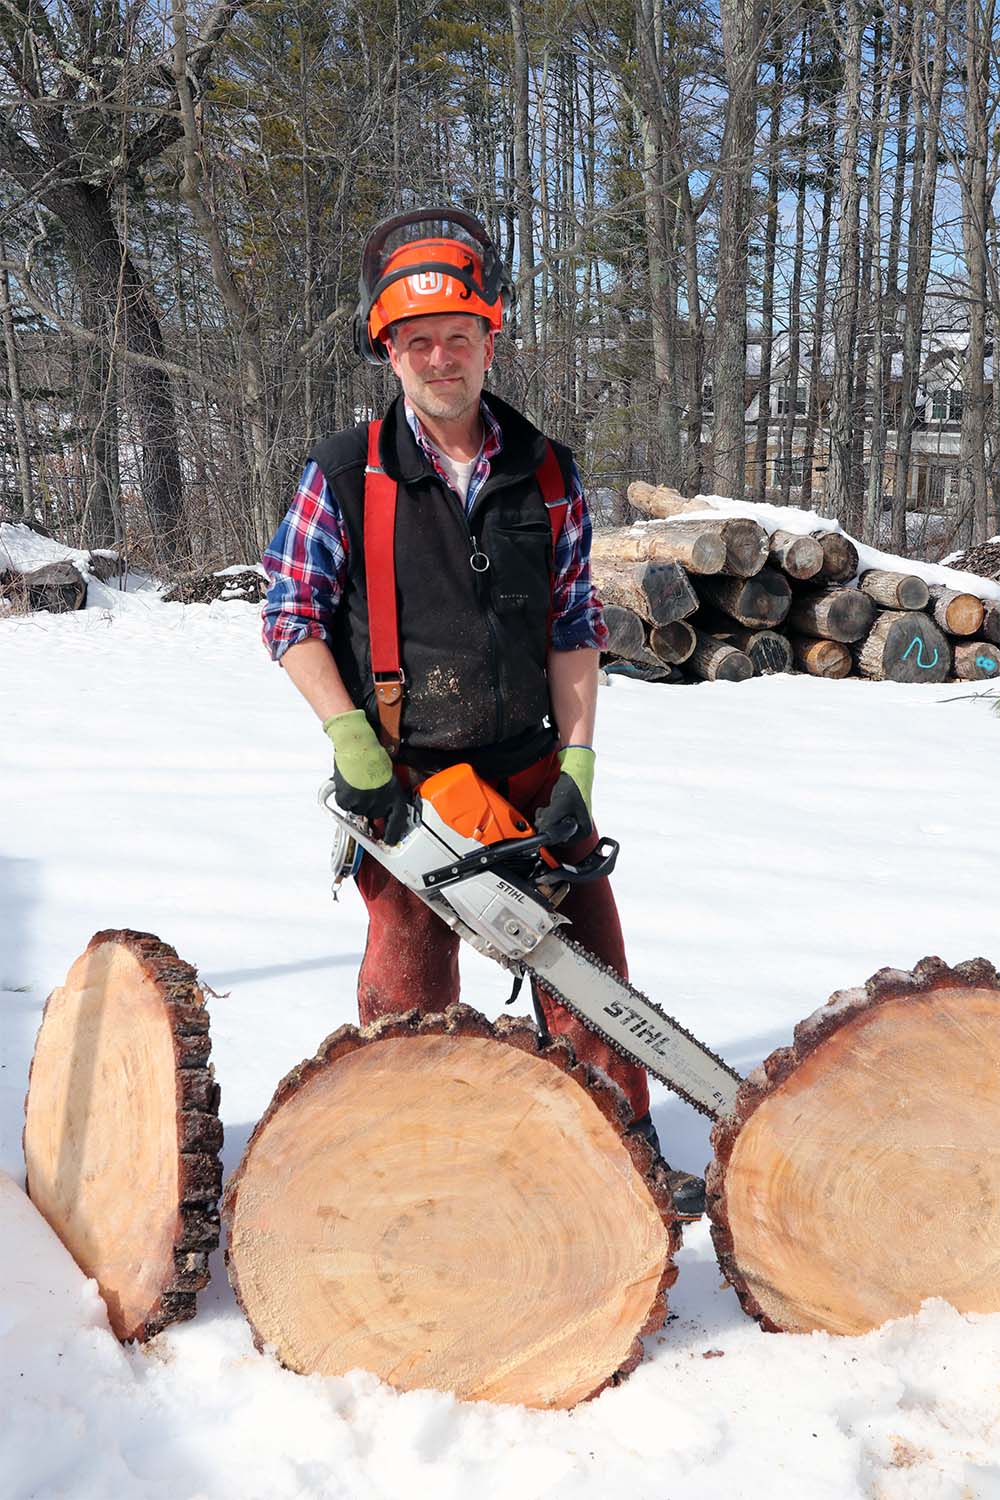 UNH woodlands manager Steve Eisenhaure stands holding his chainsaw with tree cookies in front of him while at the UNH Sawmill.